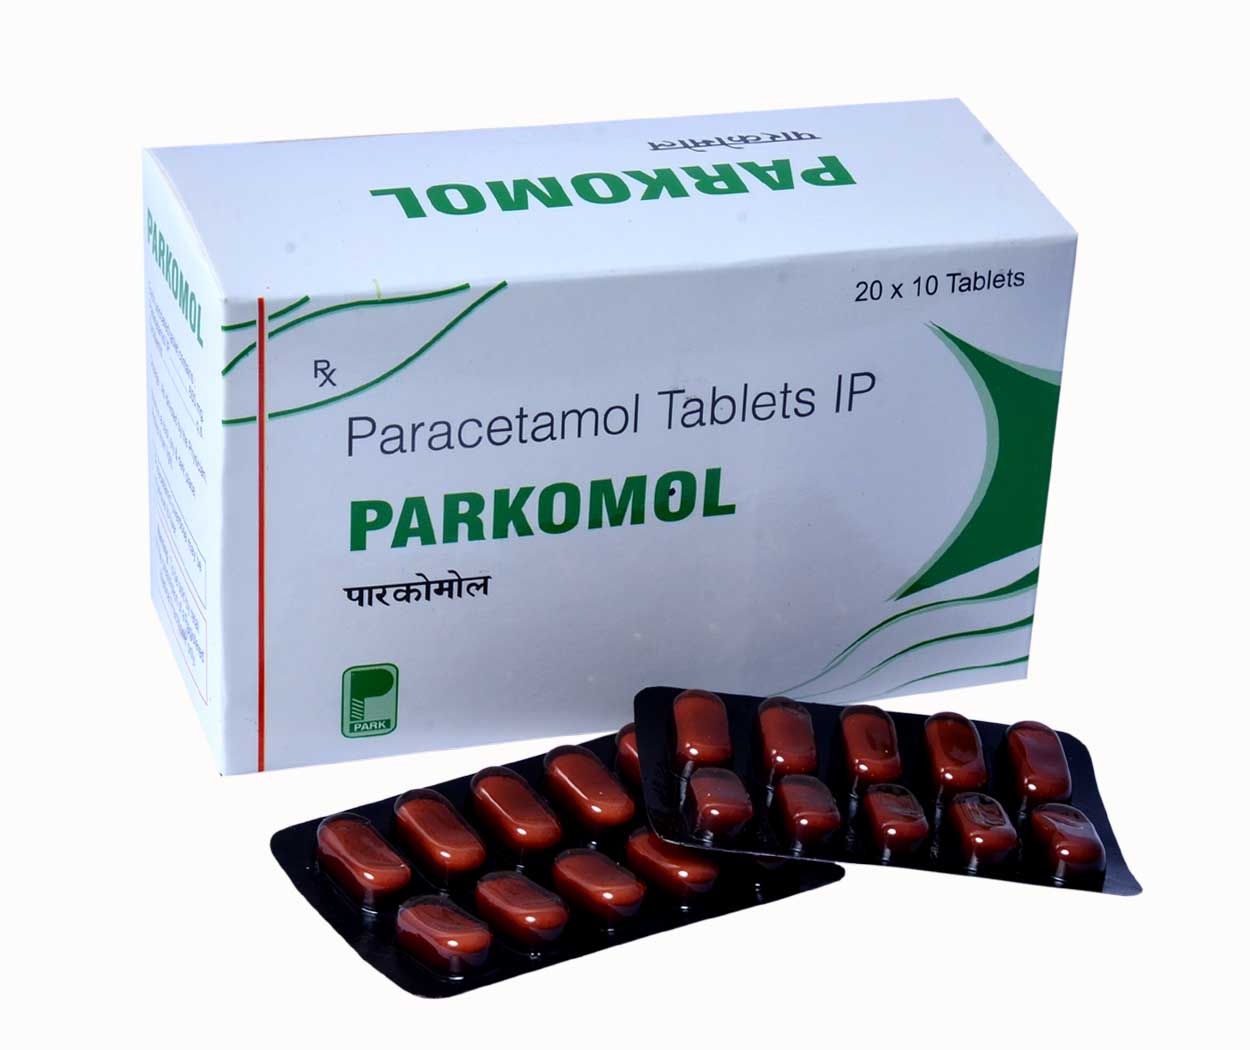 Product Name: PARKOMOL, Compositions of PARKOMOL are Paracetamol Tablets IP - Park Pharmaceuticals